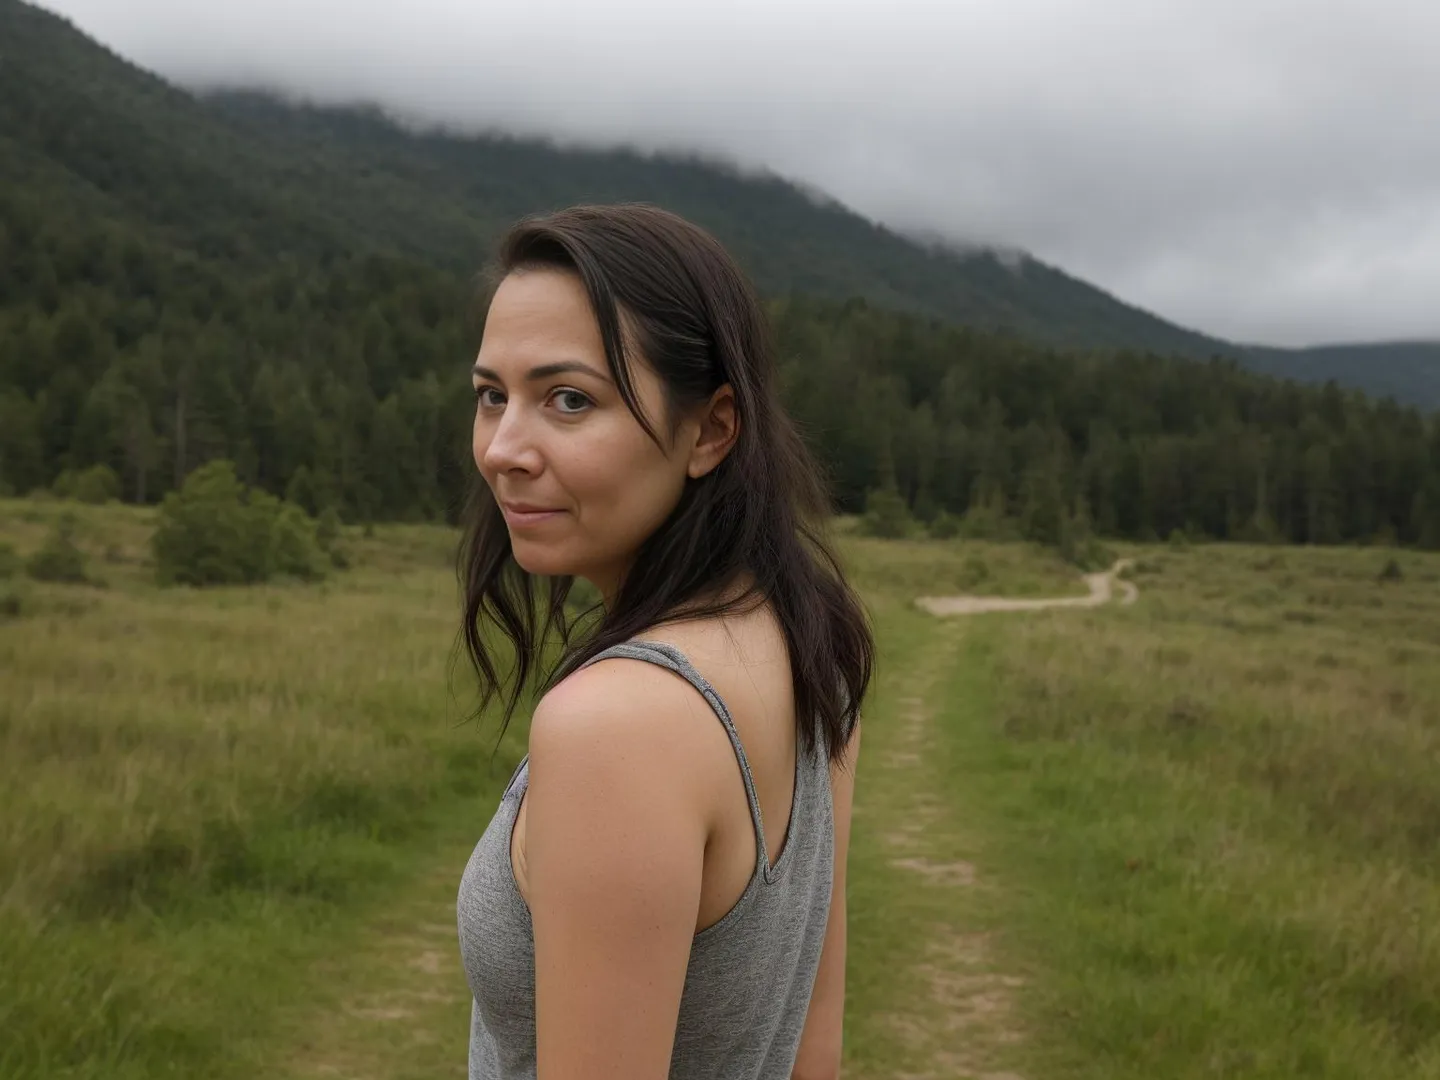 A woman with dark hair wearing a grey tank top standing on a grassy path in a mountainous landscape, AI generated image using stable diffusion.